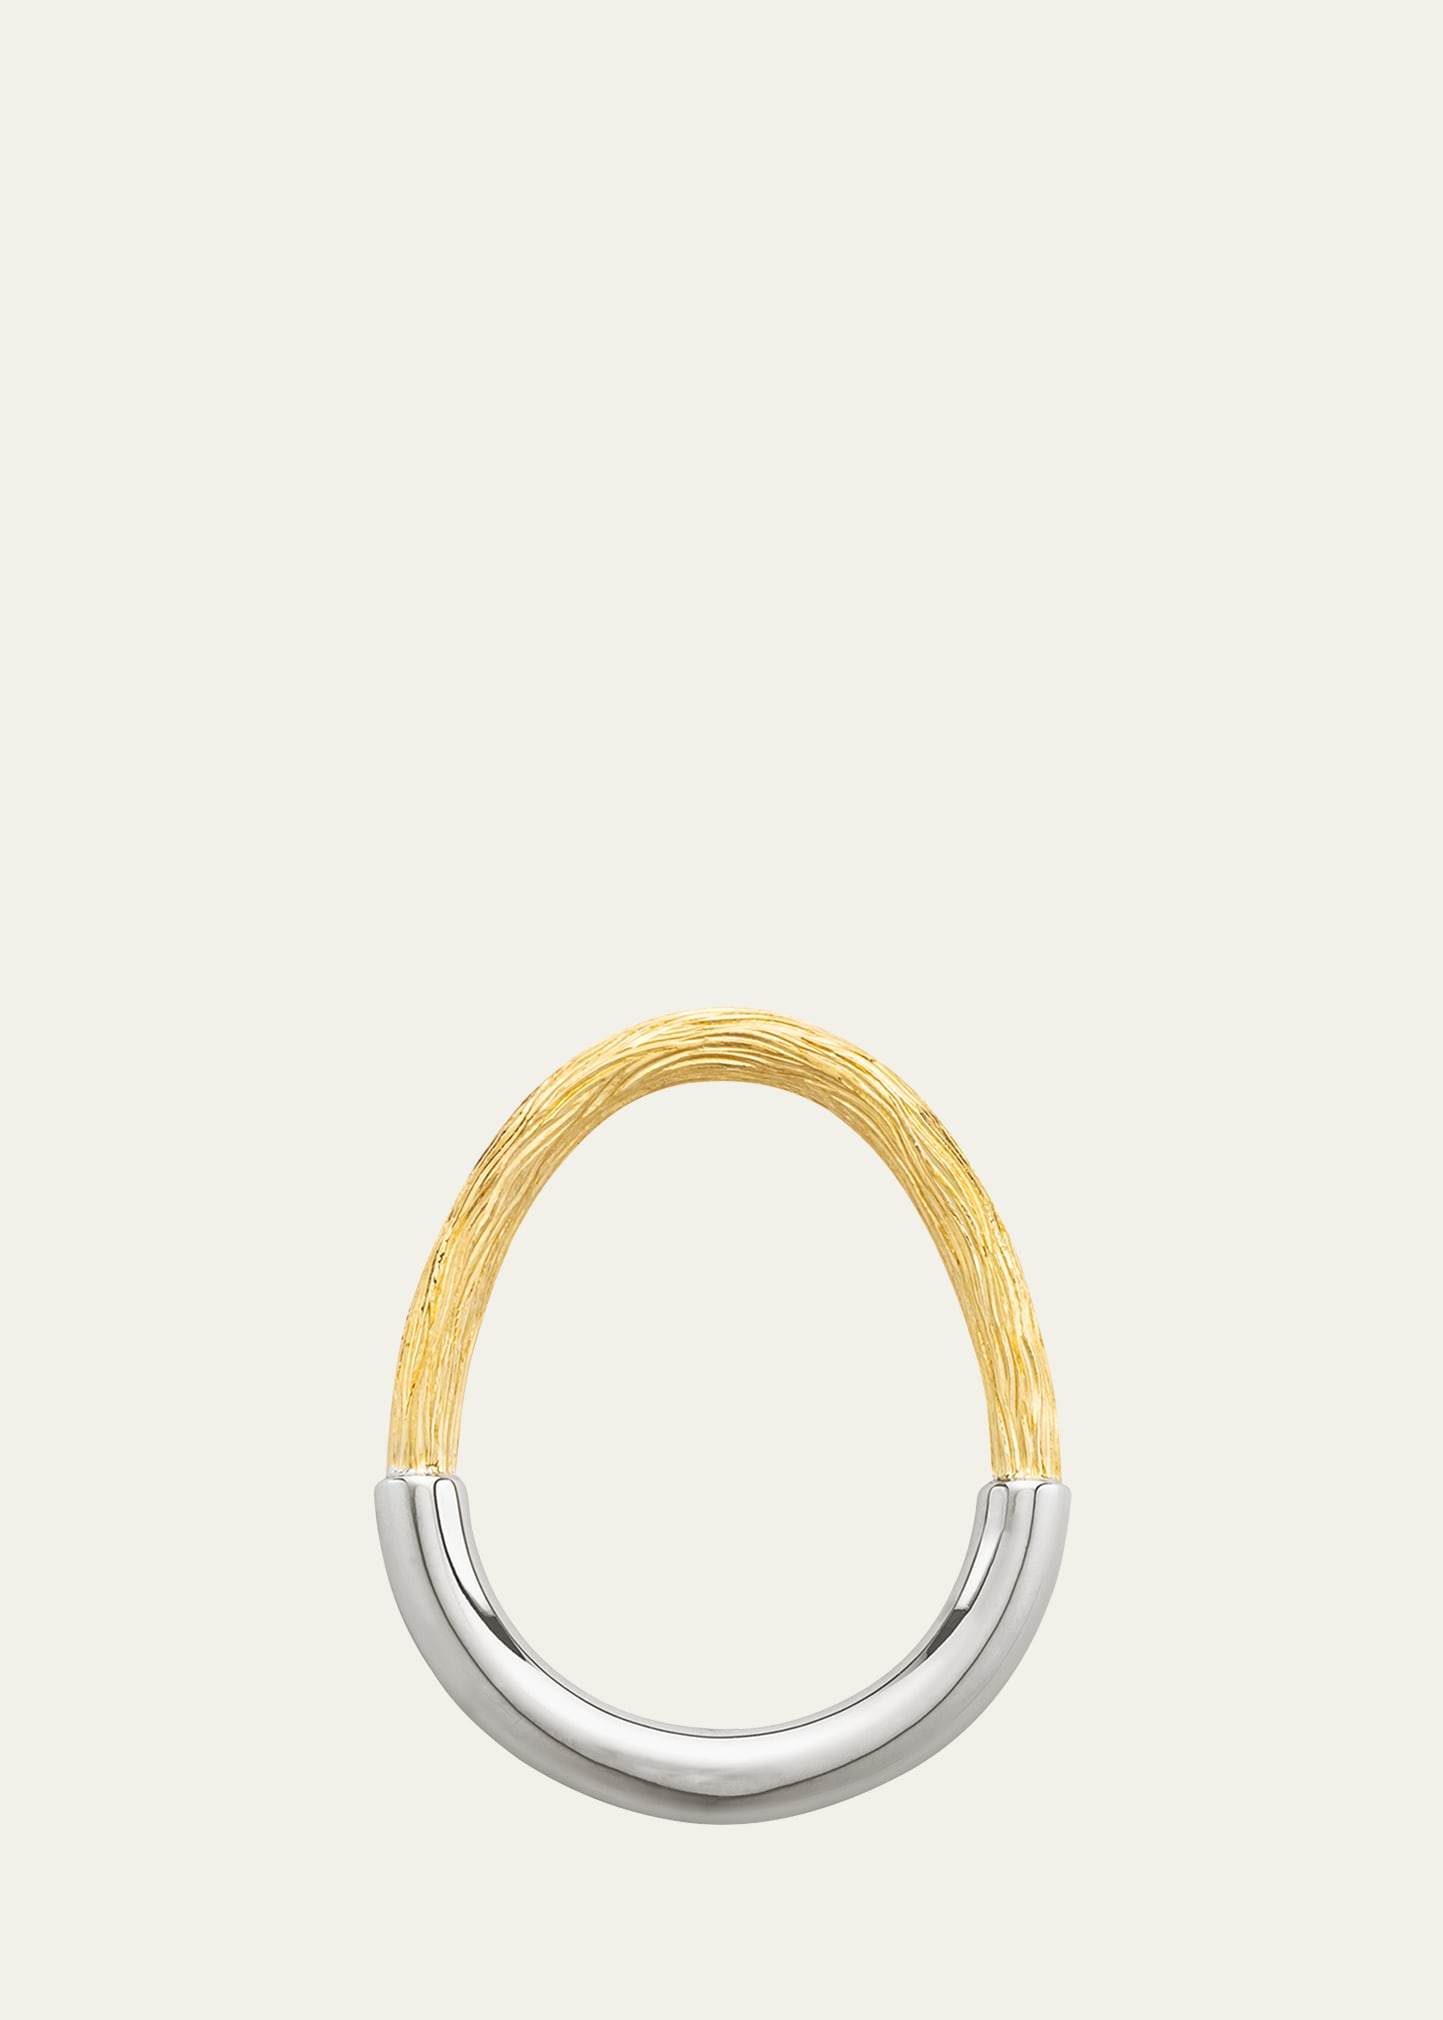 18K Yellow and White Gold Riviera Chasing Band Ring